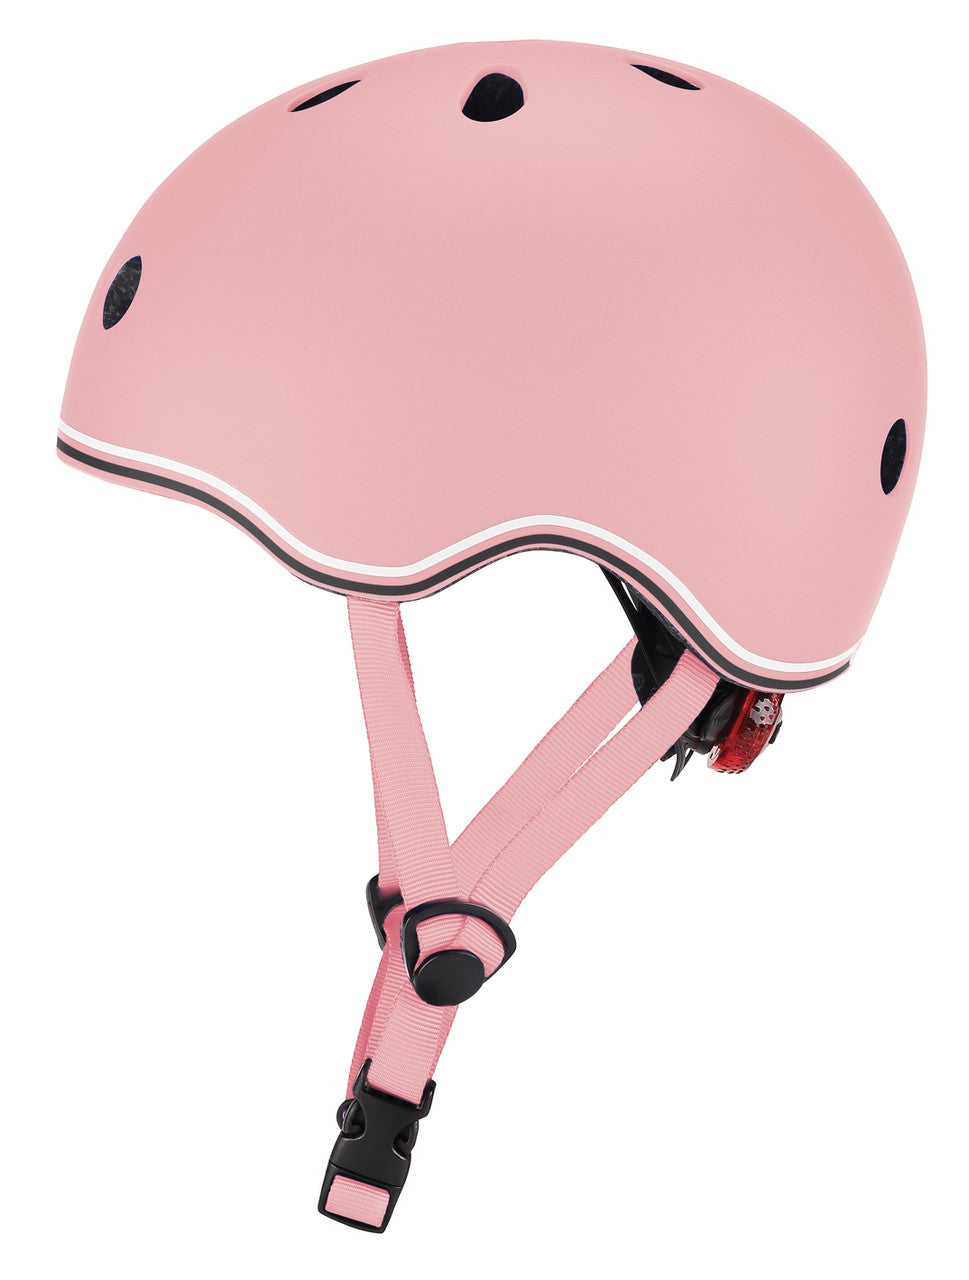 Globber Helmet for Toddlers - Pastel Pink - Extra Small (46-51cm)